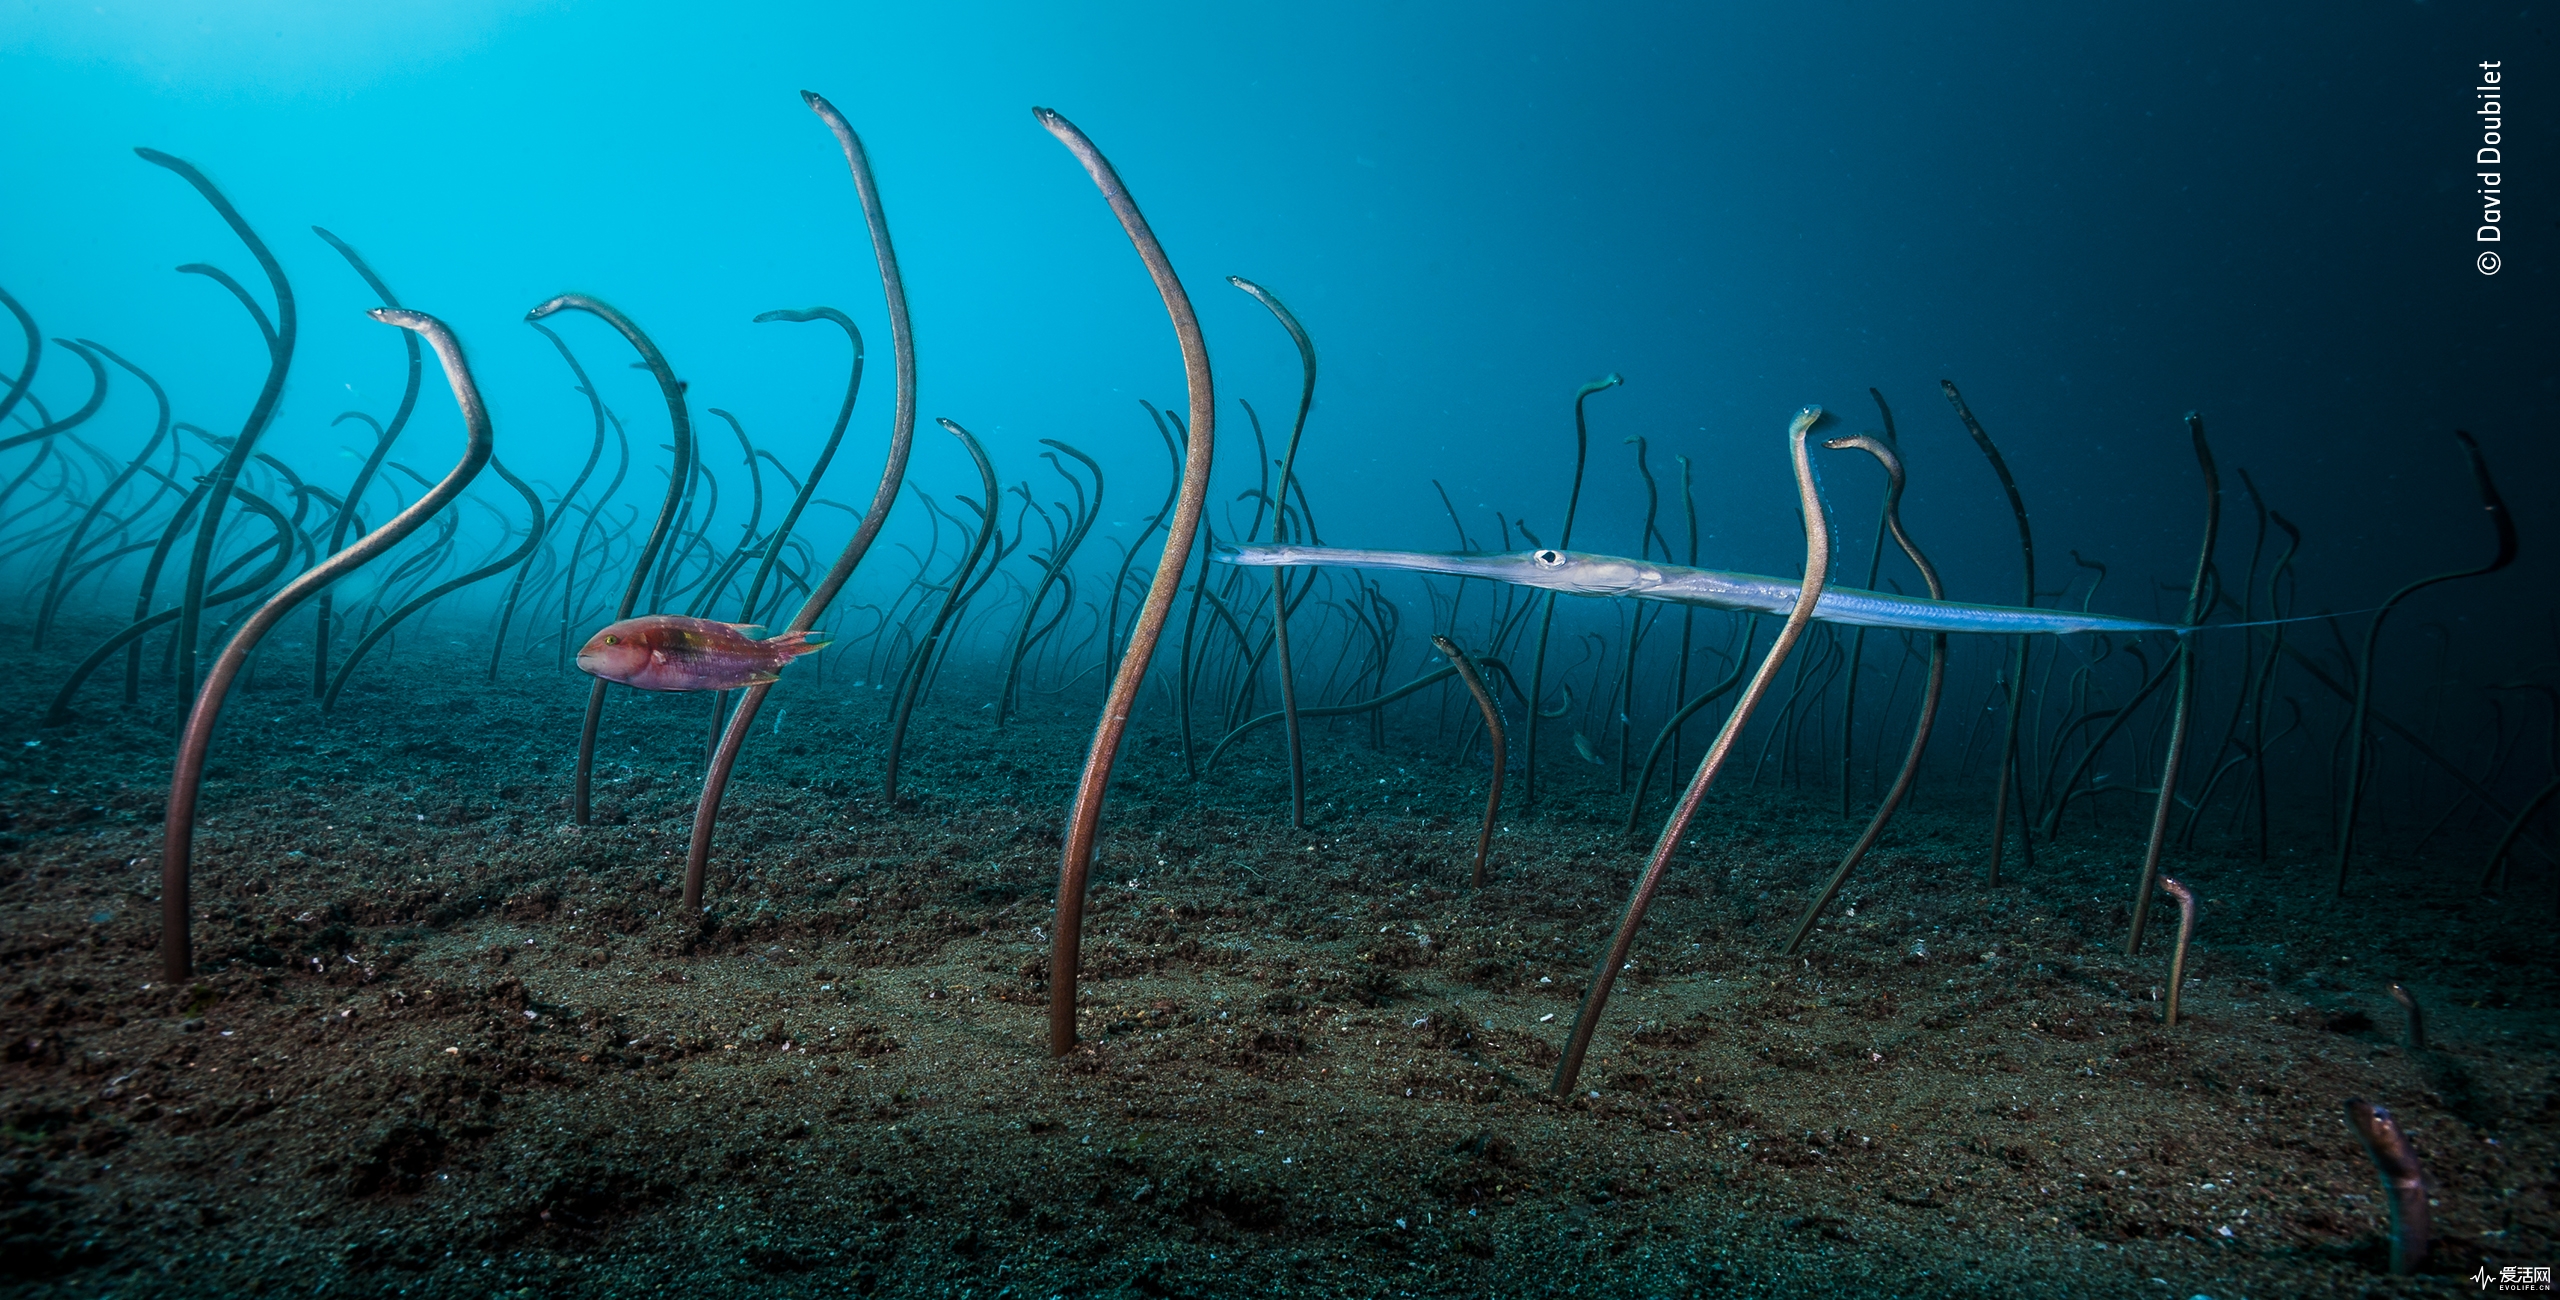 A wrasse and coronet fish glide through a vast colony of garden eels off Dumaguete, Philippines. The extremely shy and elusive garden eels disappear the moment they detect your presence. This image required deploying a remote camera set up to capture the shy eels fully extended and feeding on plankton in the current.